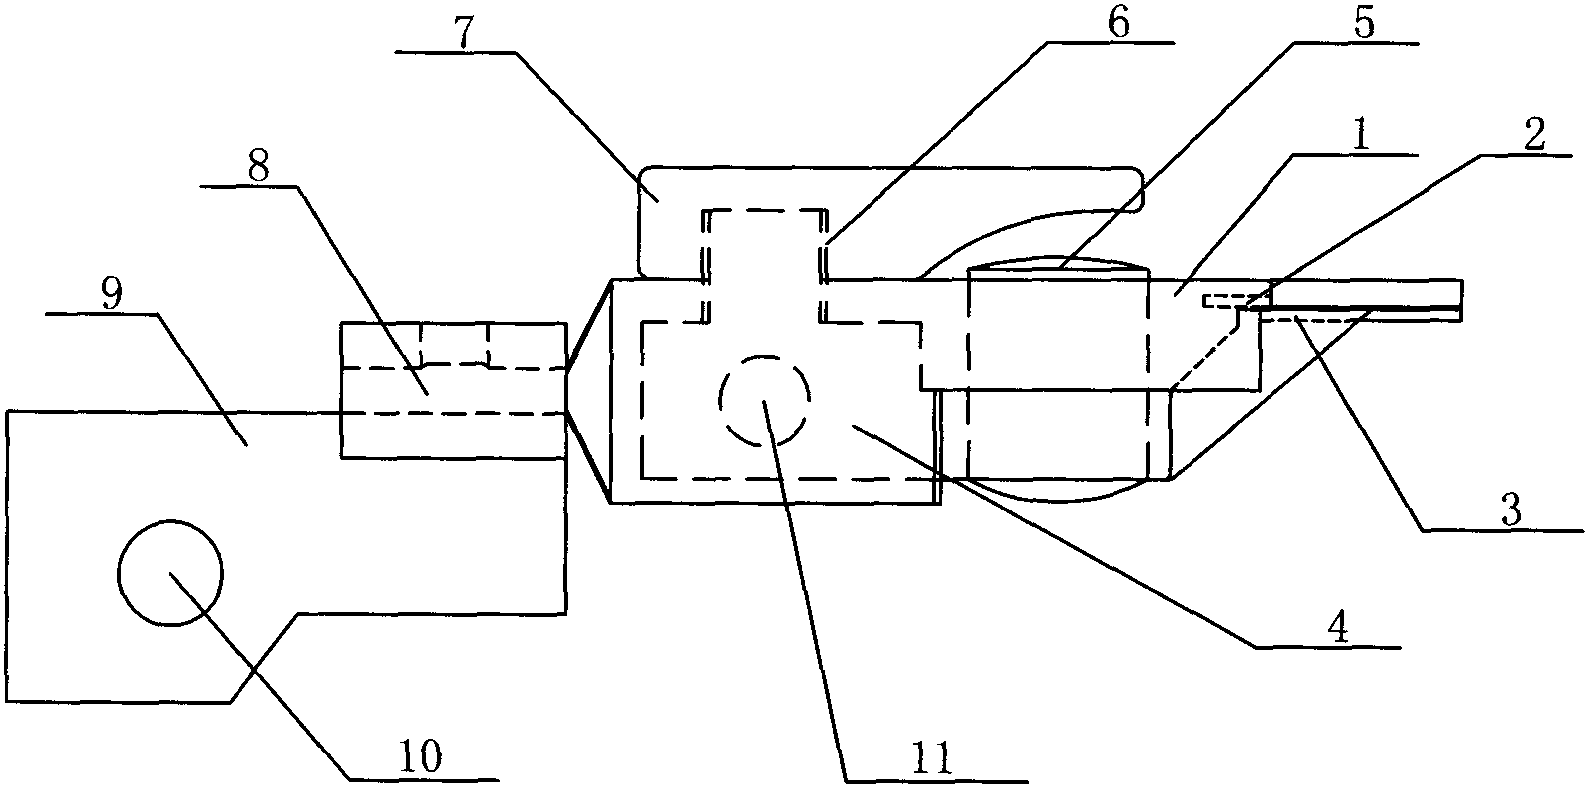 Closed penetration-free filament collecting device used for reeling silk